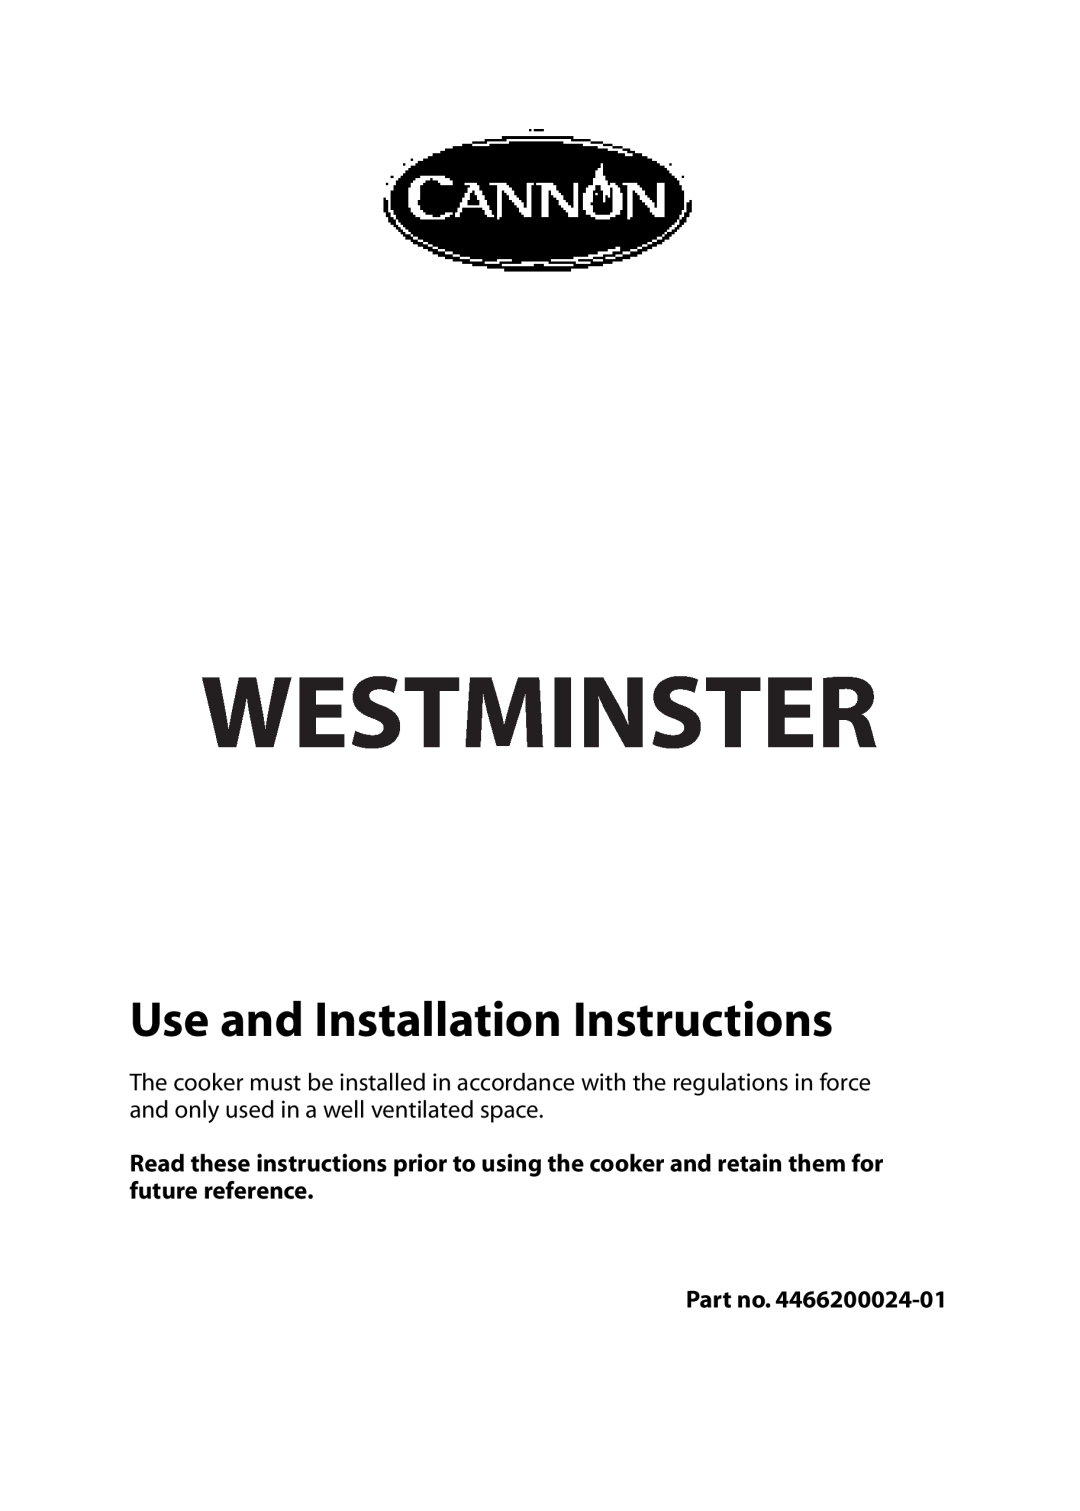 Cannon 4466200024-01 installation instructions Westminster, Use and Installation Instructions 